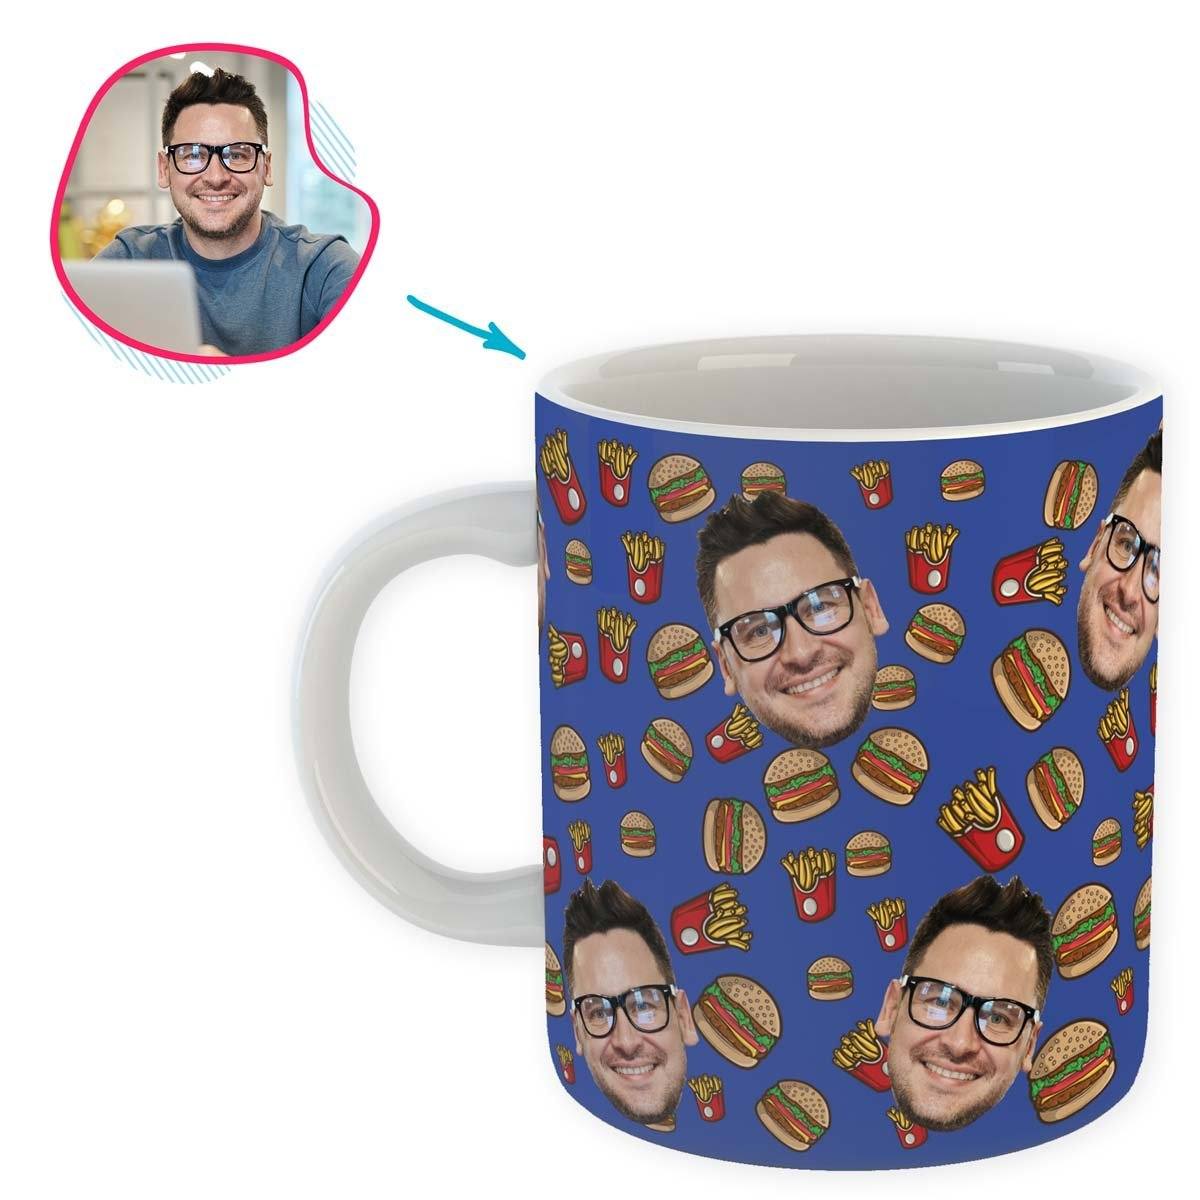 darkblue Fastfood mug personalized with photo of face printed on it